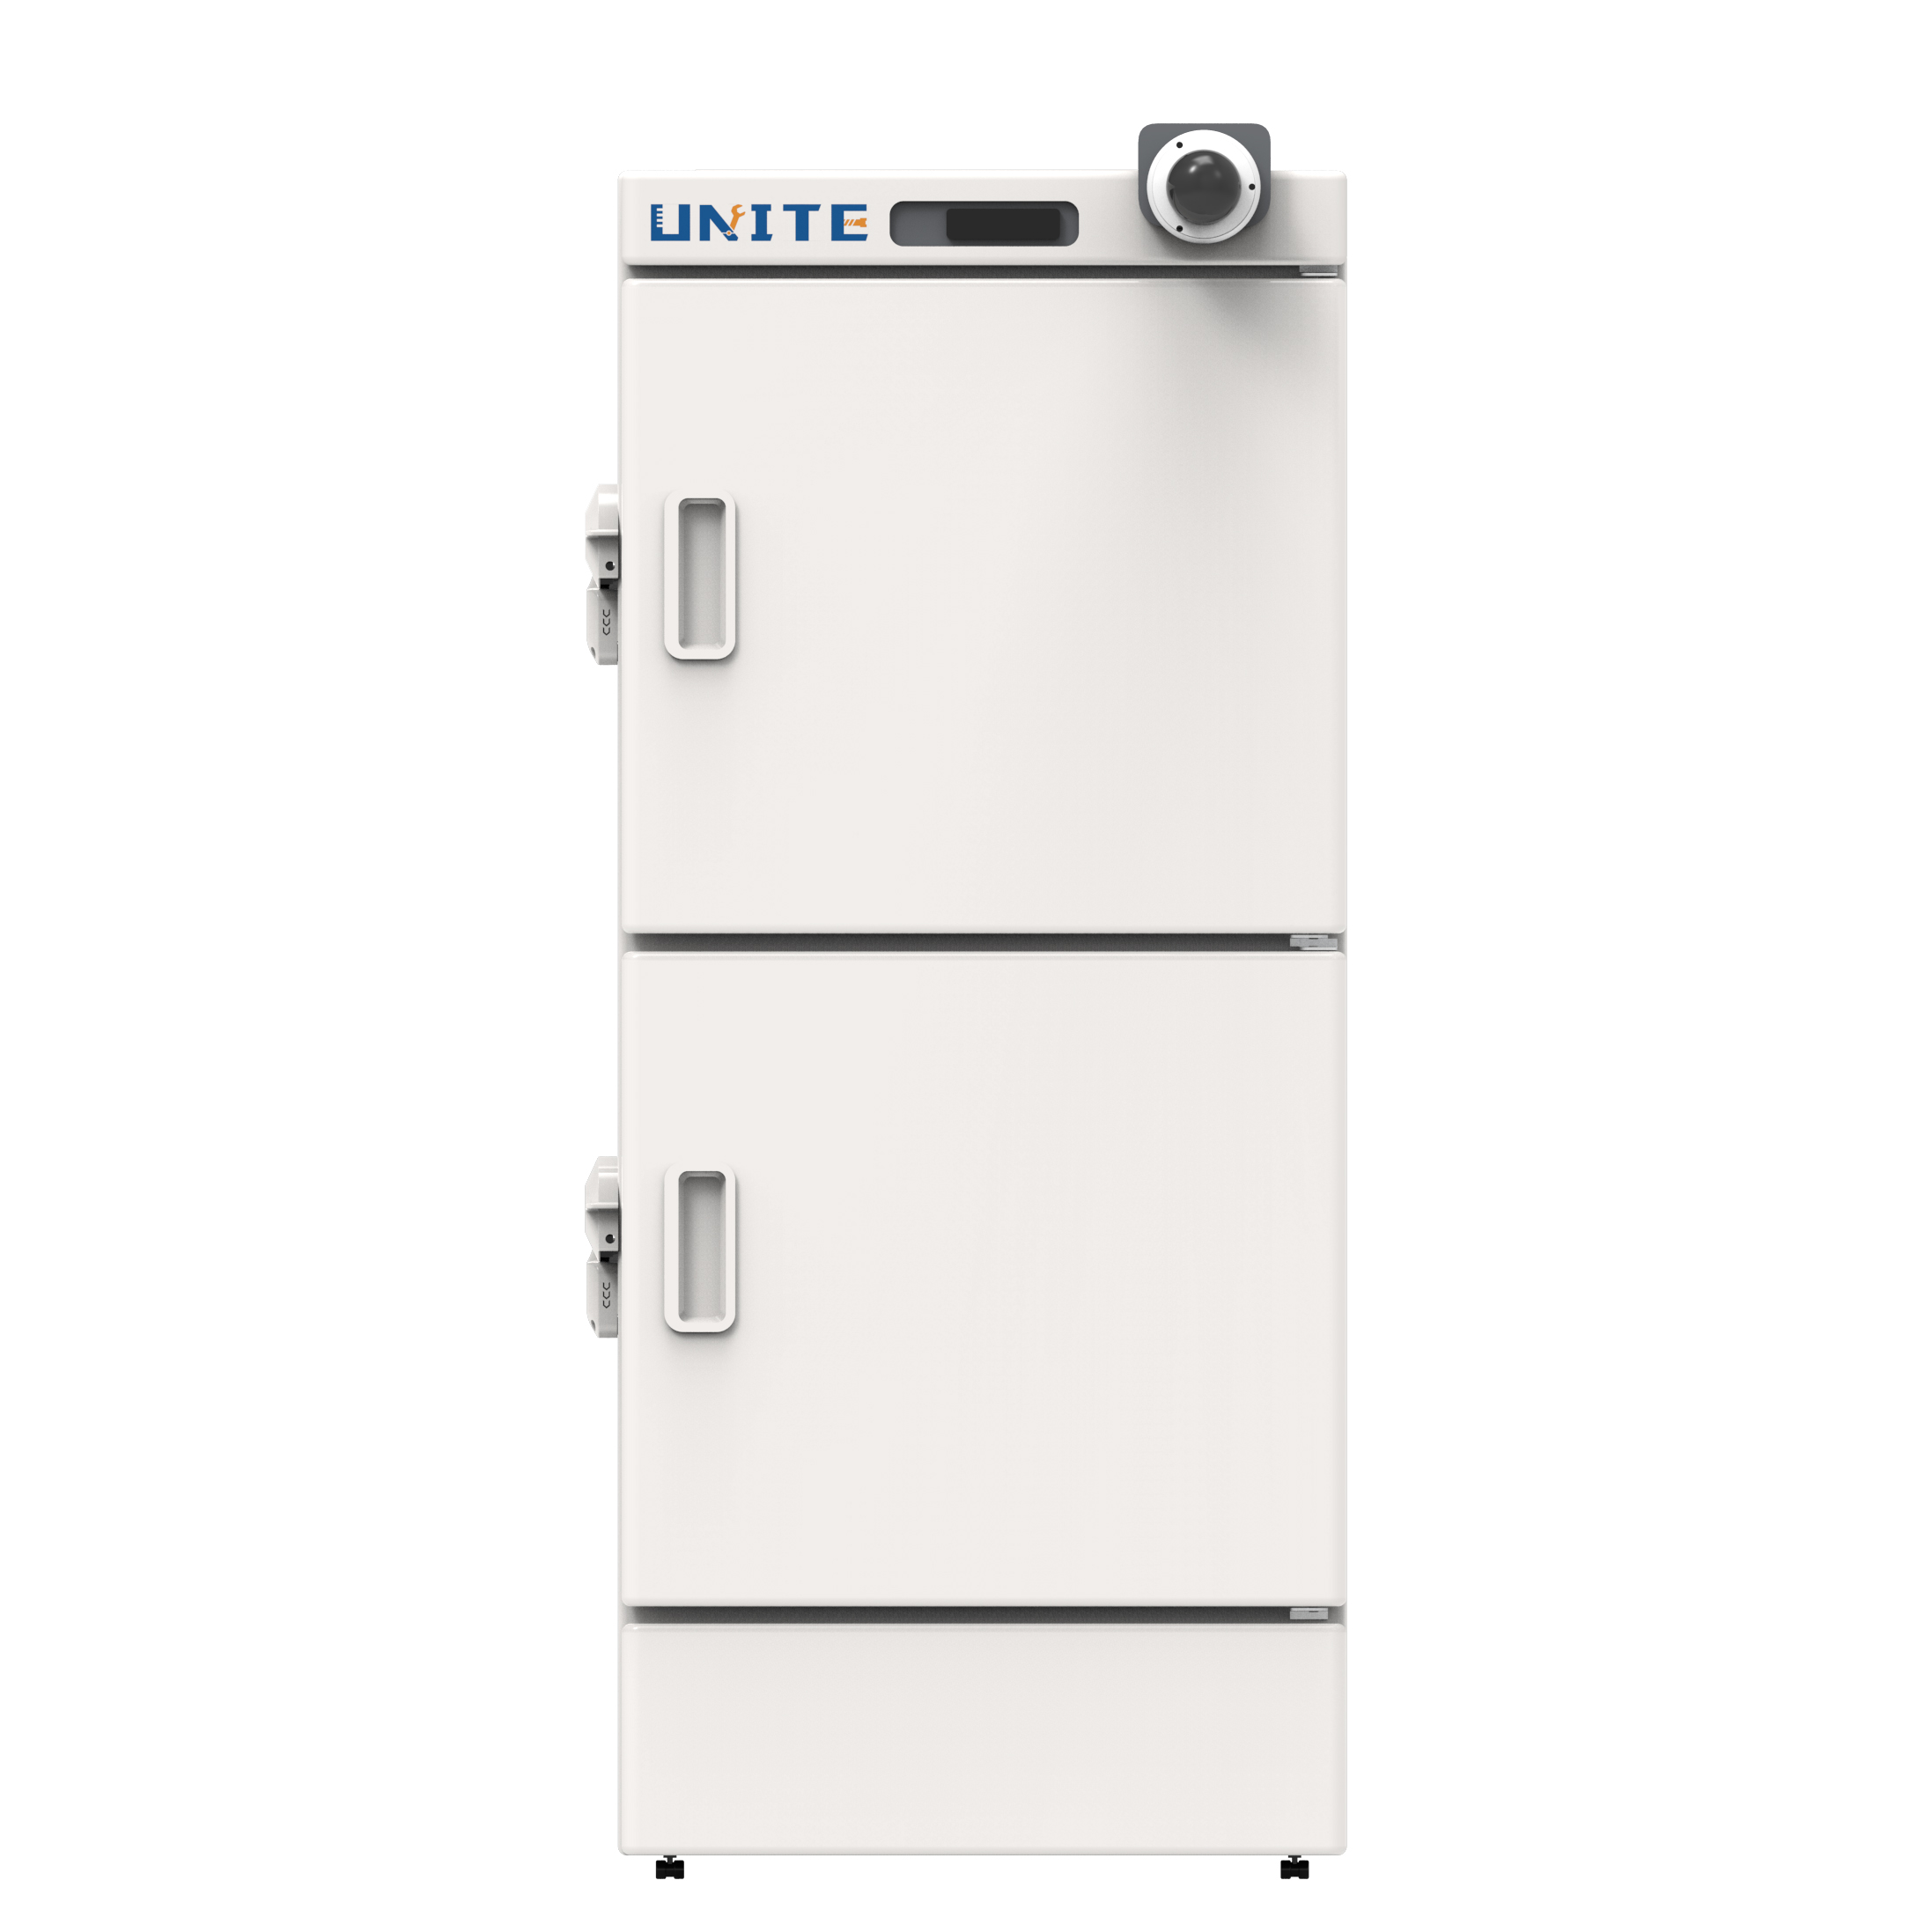 Unite Usample V3.2 -40~-20C Lab Sample Management System Matrix IoT Cryopreservation Box for Standard Products, Drugs, Vaccines